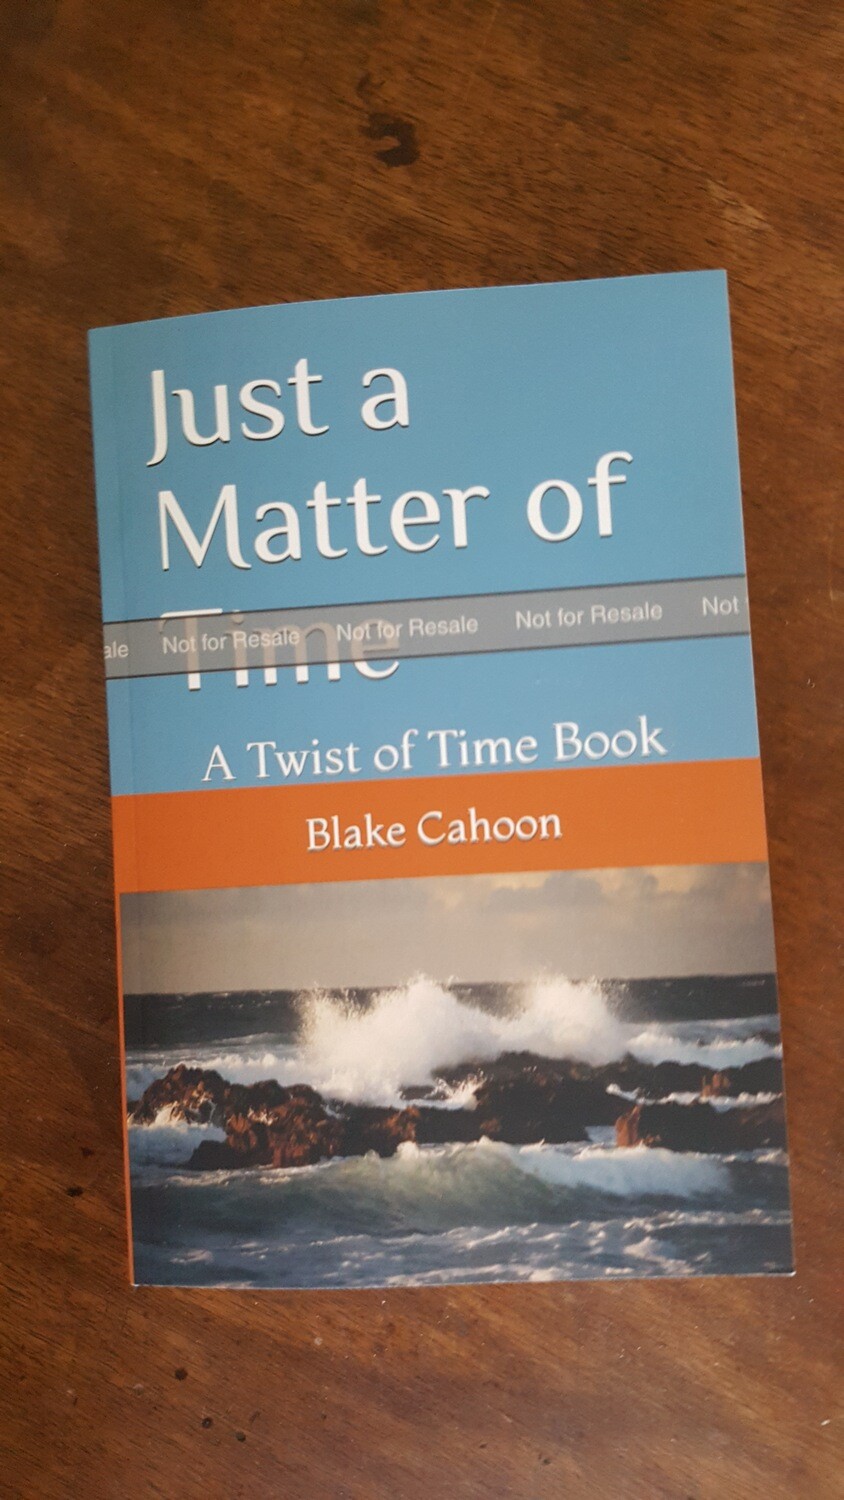 Just a Matter of Time by Blake Cahoon